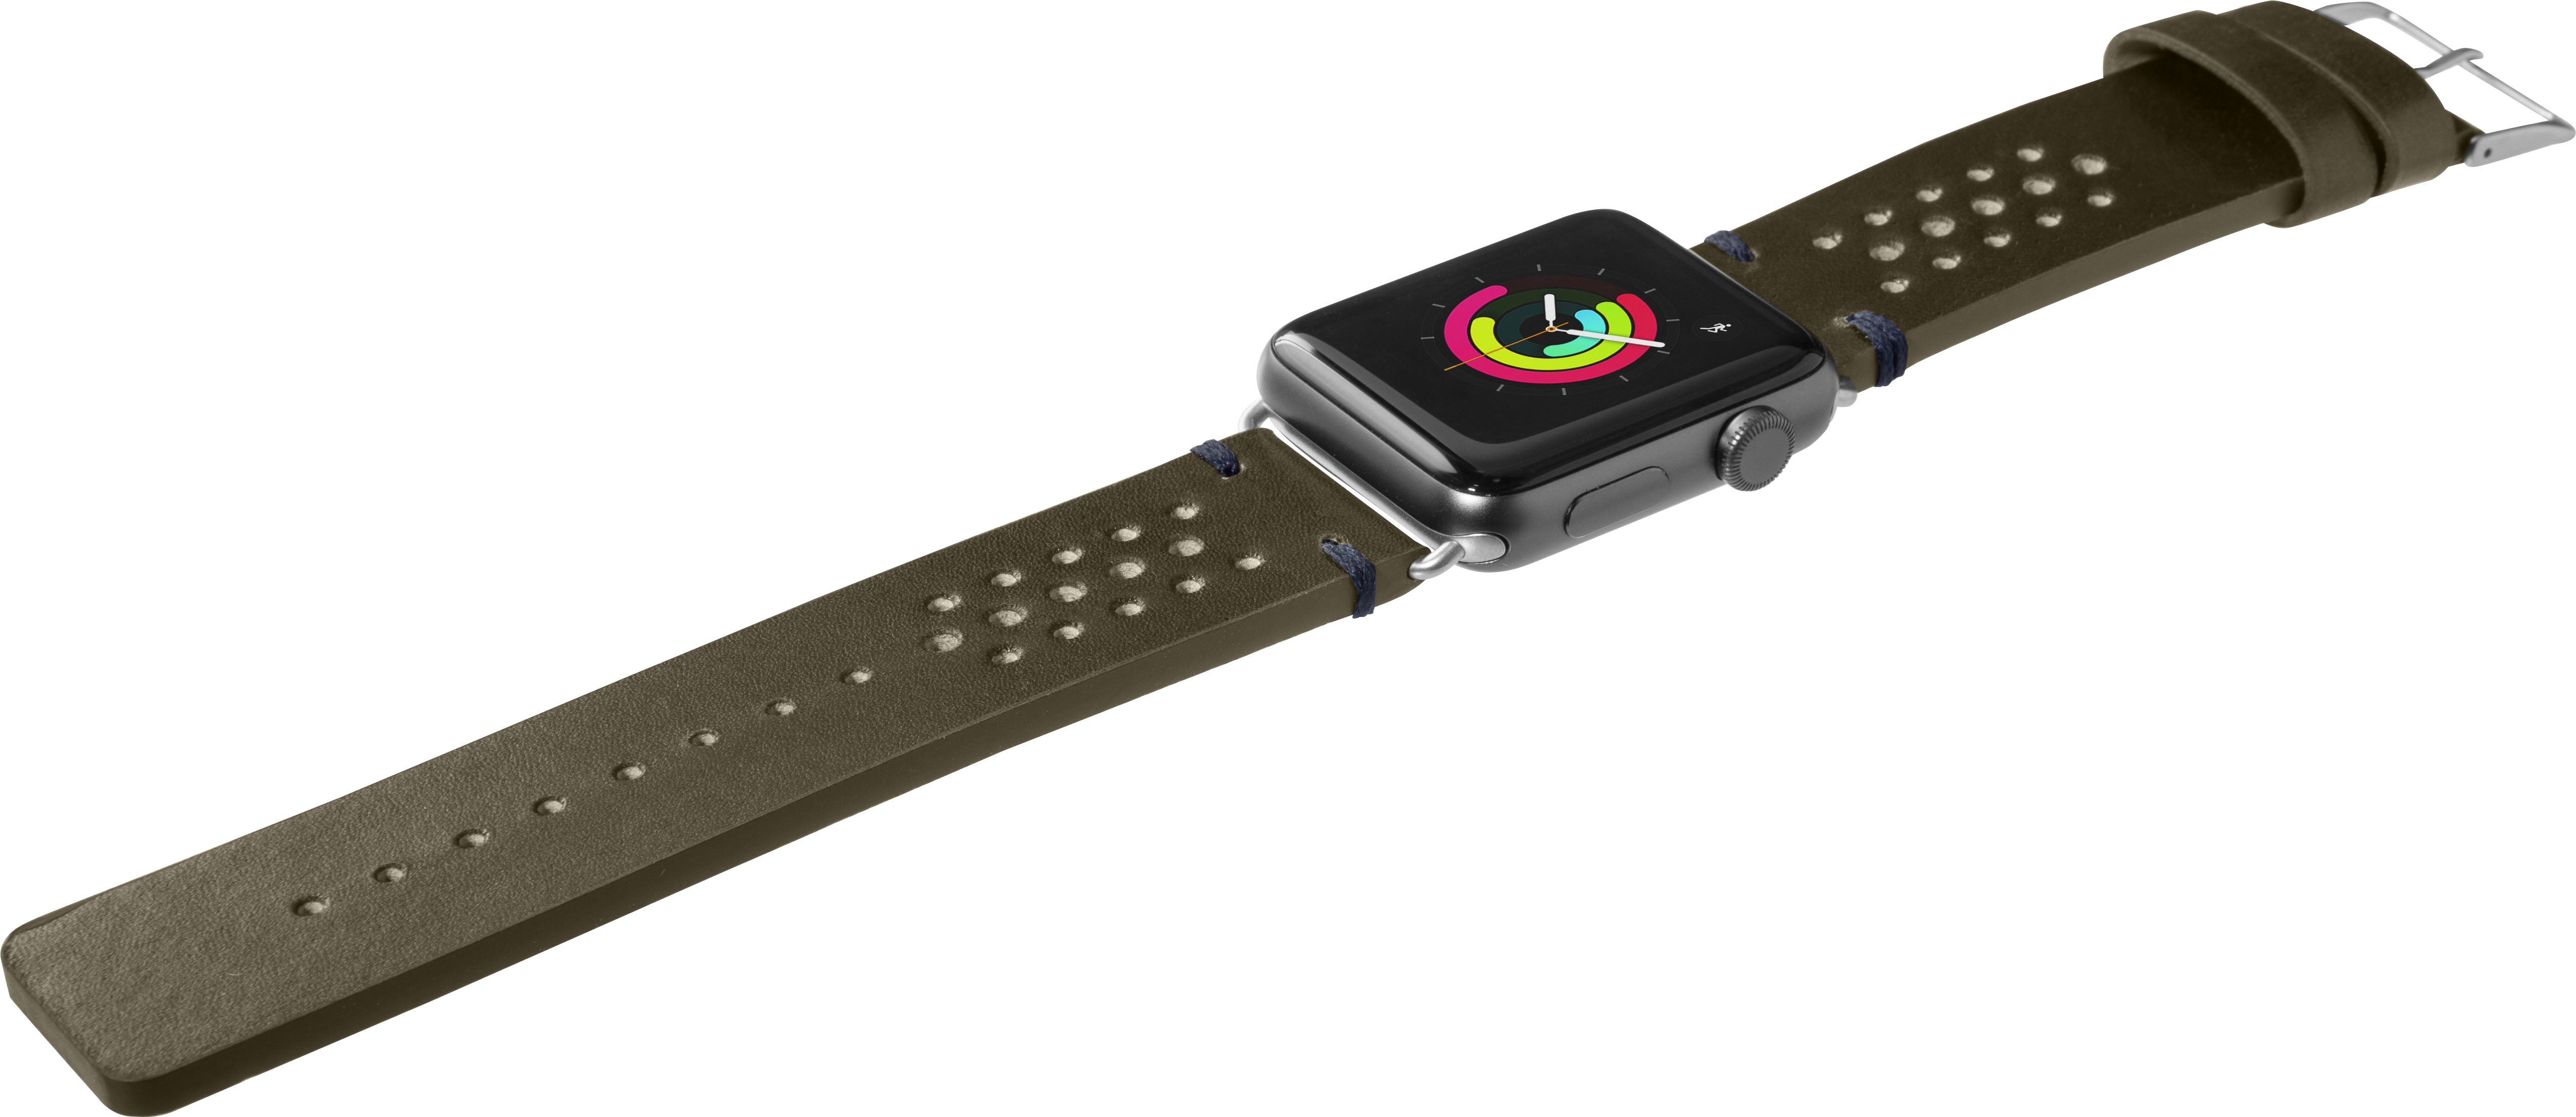 Dây đeo Heritage Watch Strap For Apple Watch Series 4 ( 42mm) - Hàng chính hãng